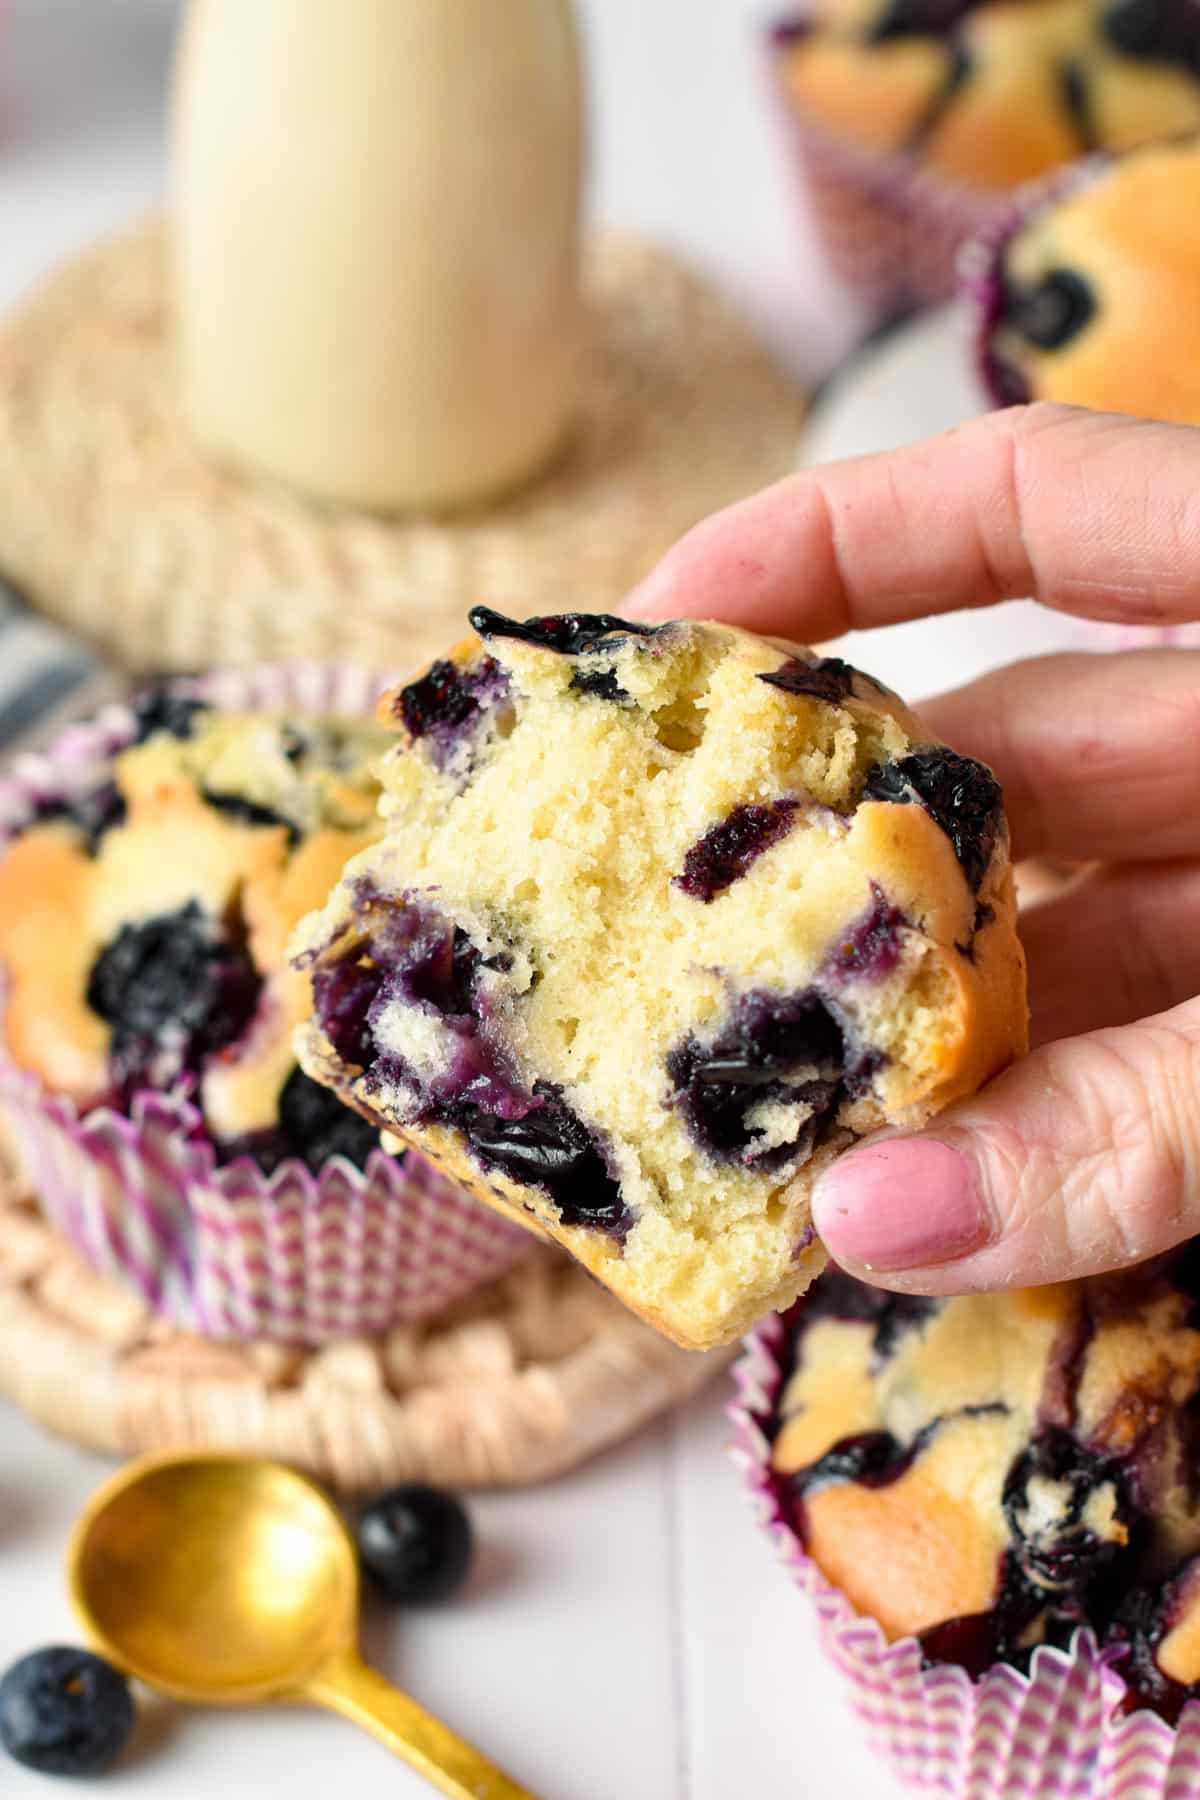 These Eggless Blueberry Muffins are easy, egg-free blueberry muffins with the most fluffy texture filled with Juicy blueberries.